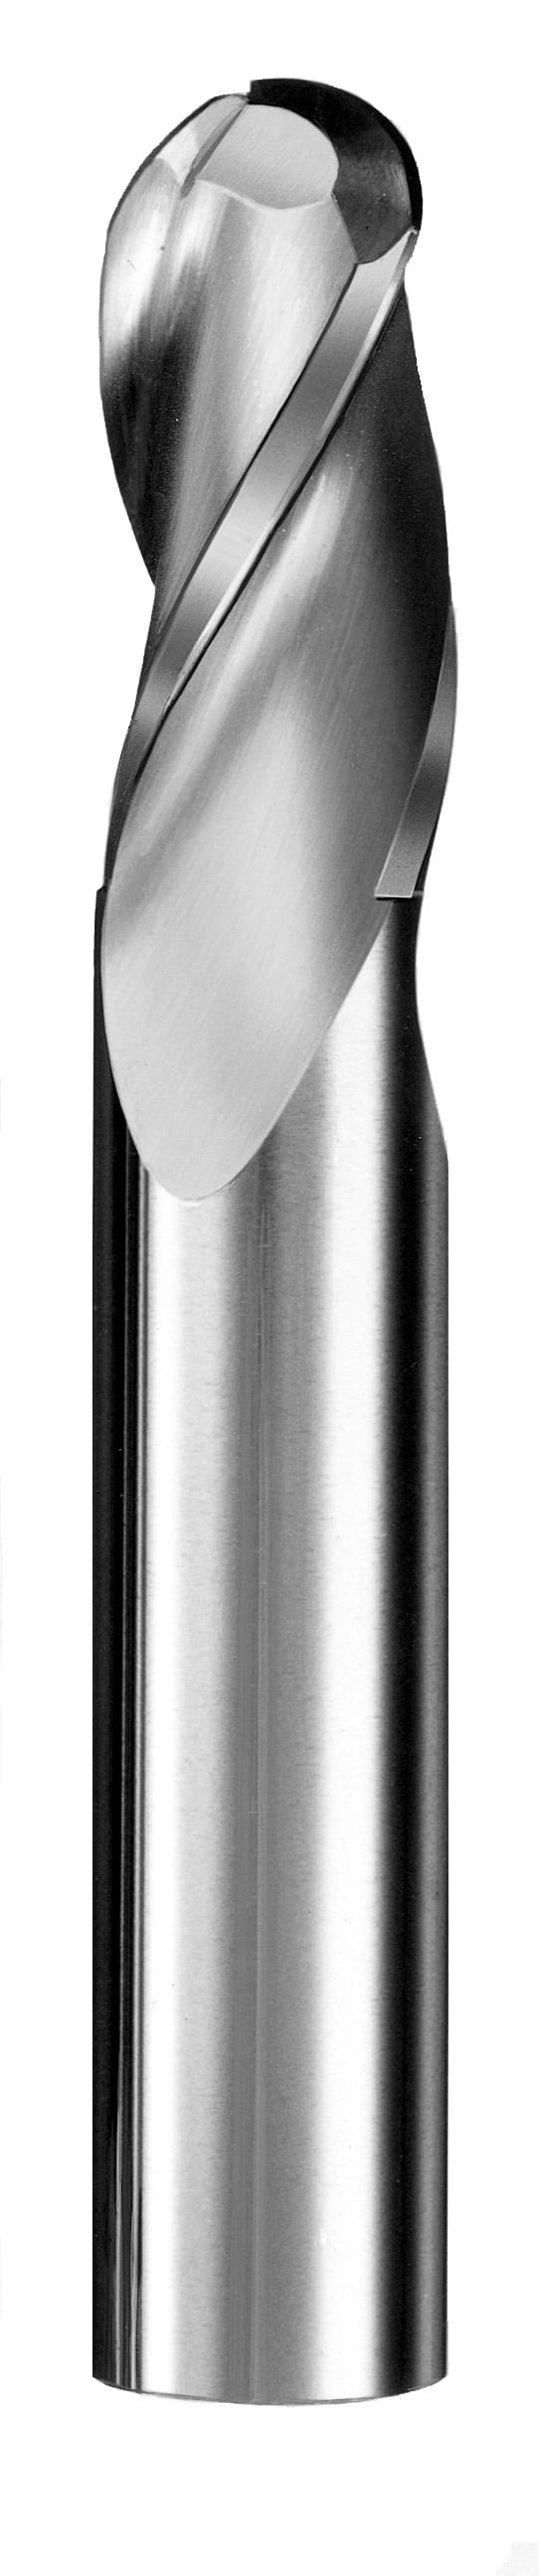 5/32" Dia, 3 Flute, Ball Nose End Mill - 30520